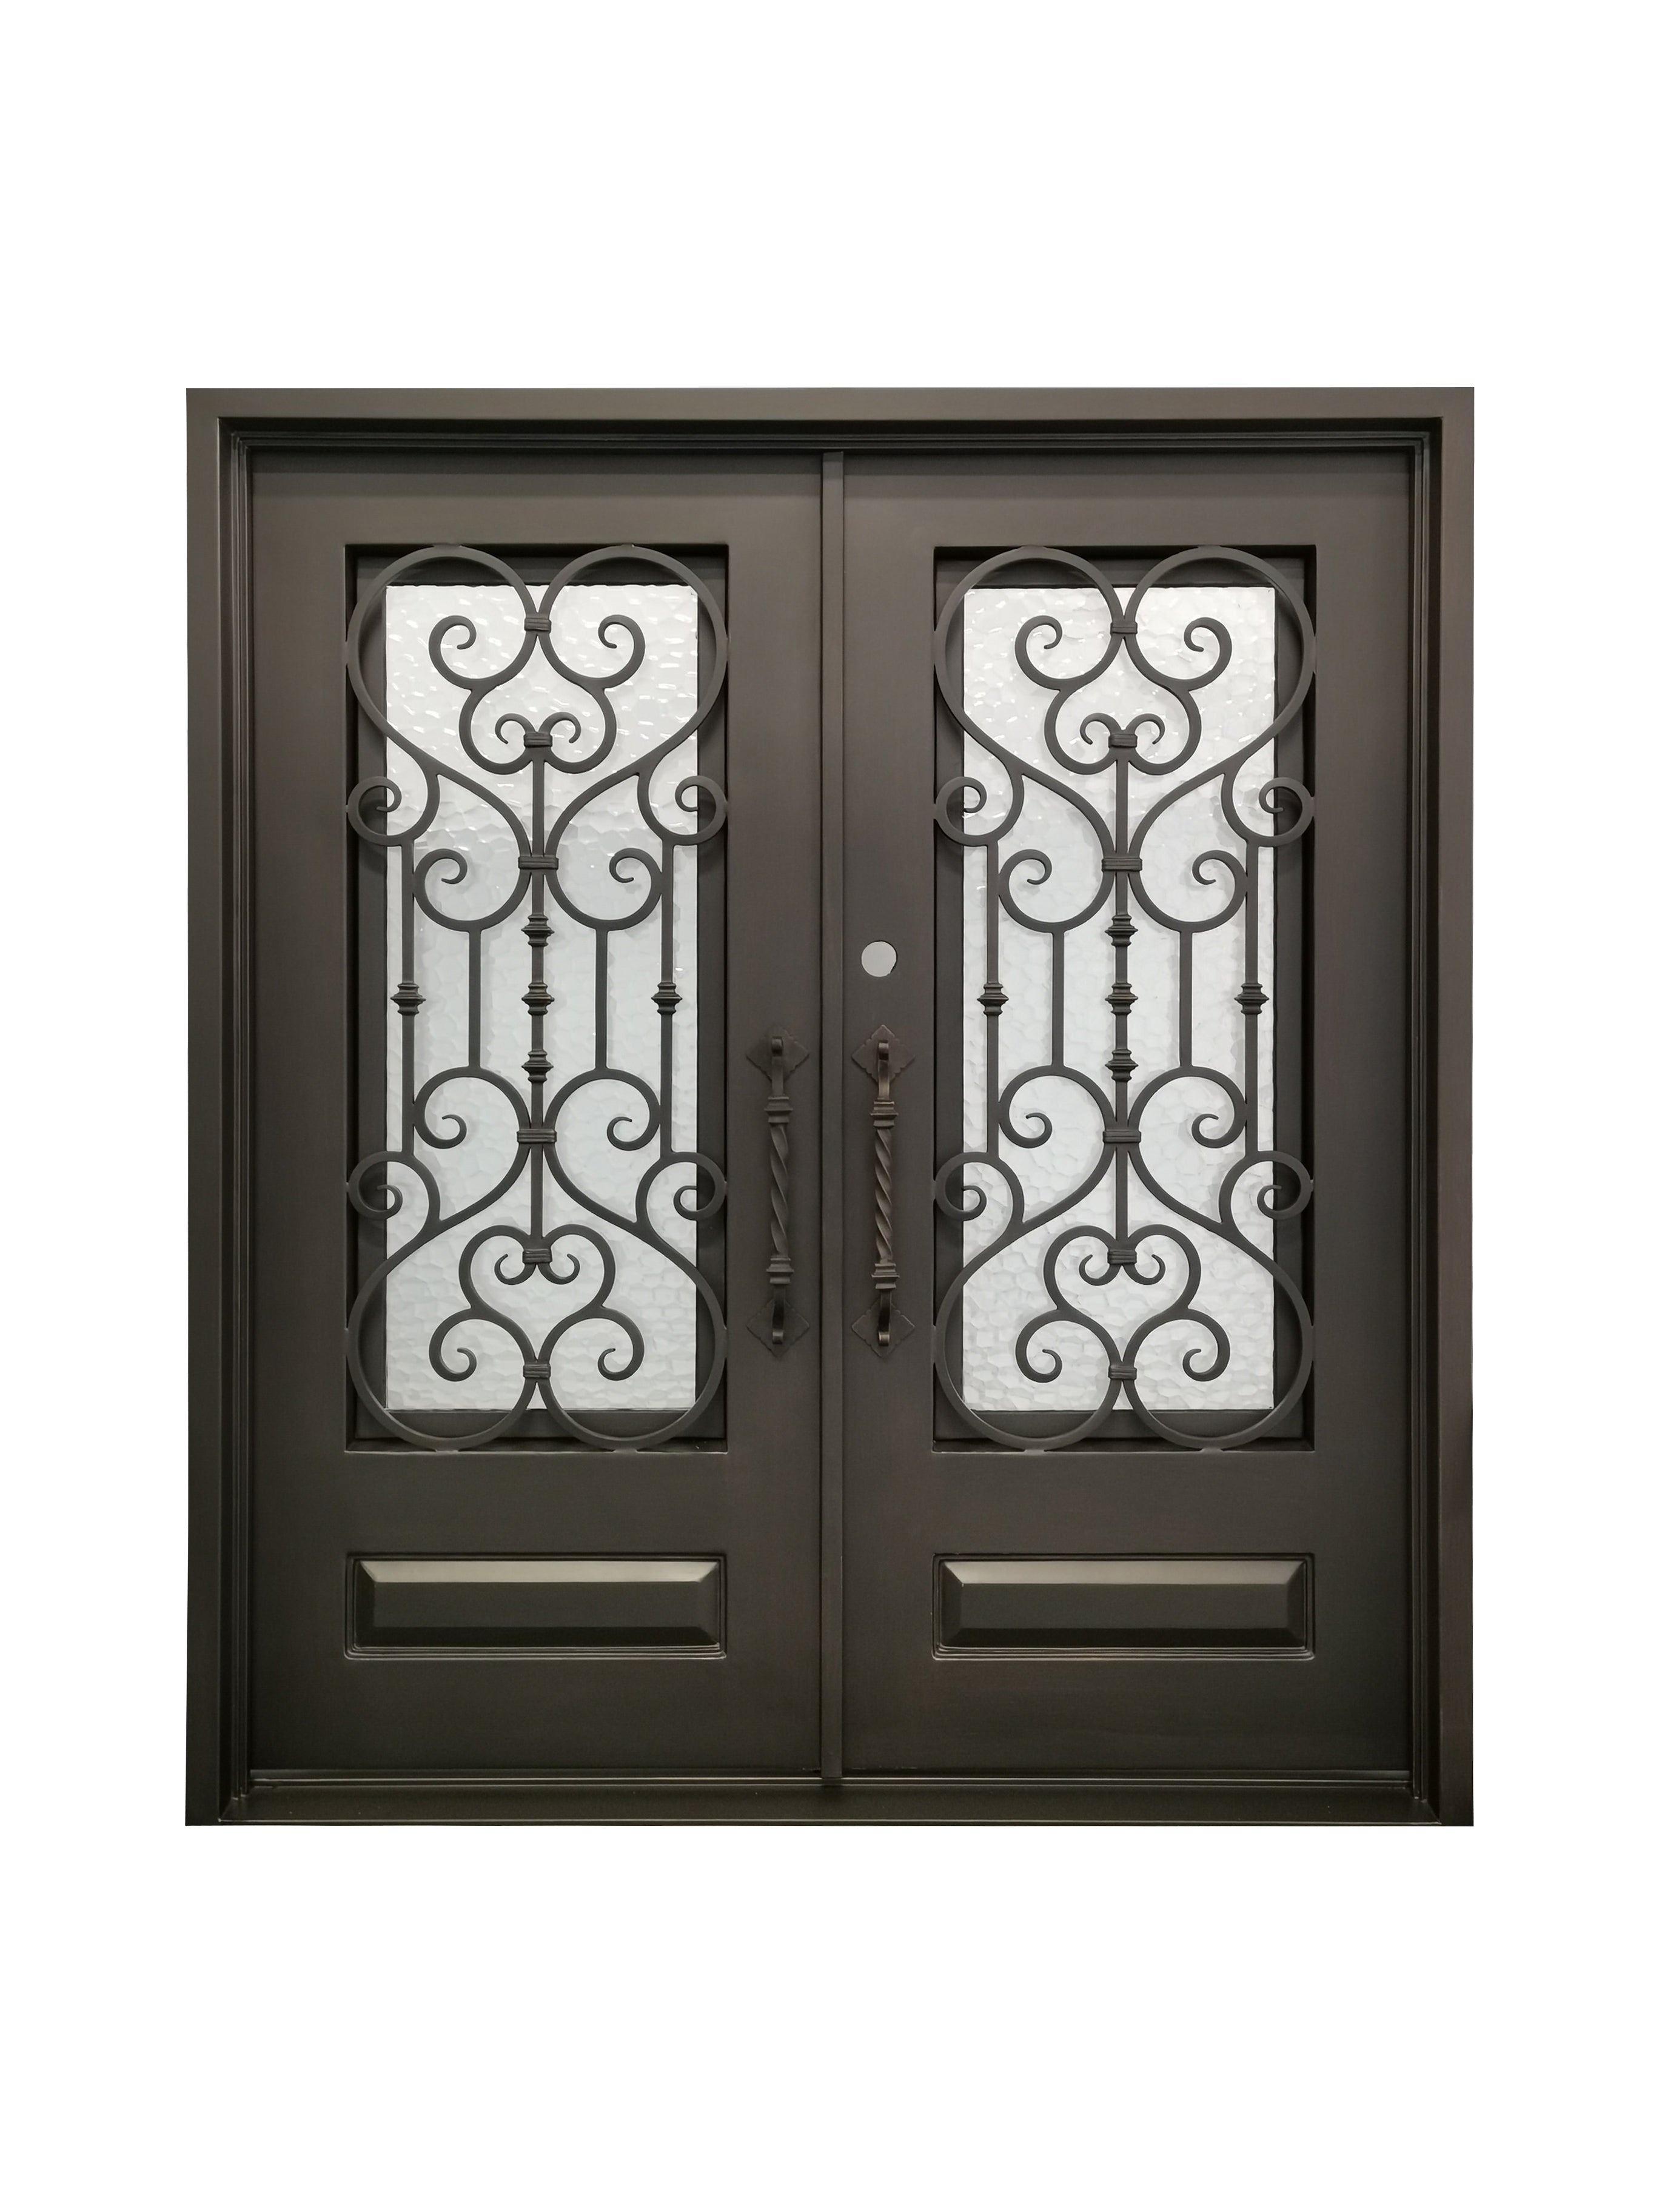 Bellmead Model Double Front Entry Iron Door With Tempered Water Cube Glass Dark Bronze Finish - AAWAIZ IMPORTS